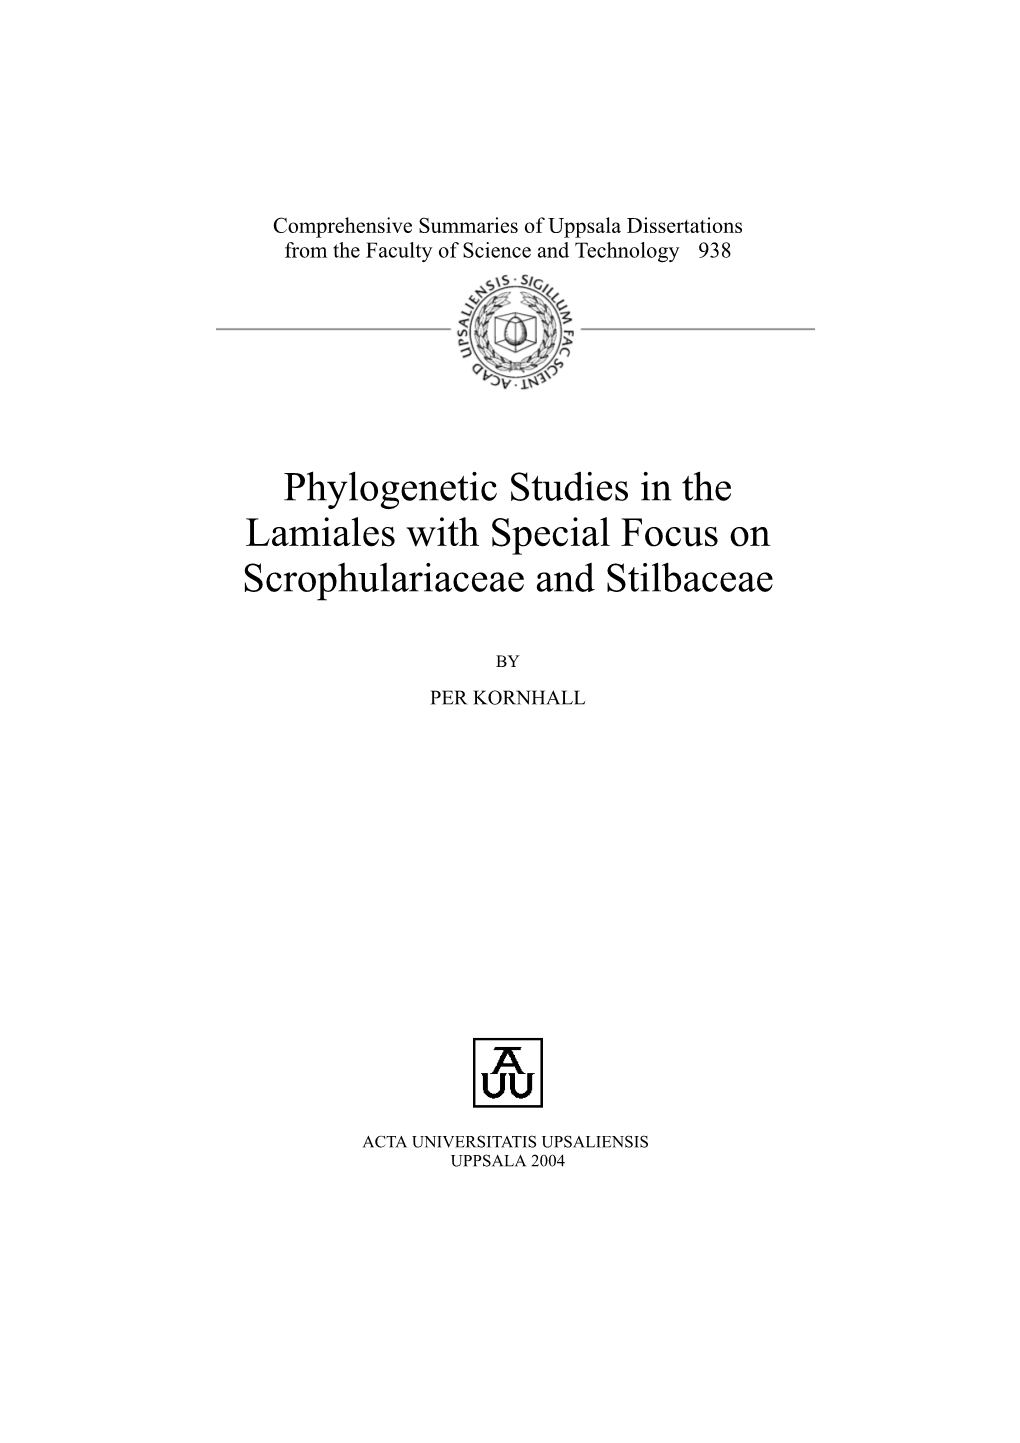 Phylogenetic Studies in the Lamiales with Special Focus on Scrophulariaceae and Stilbaceae